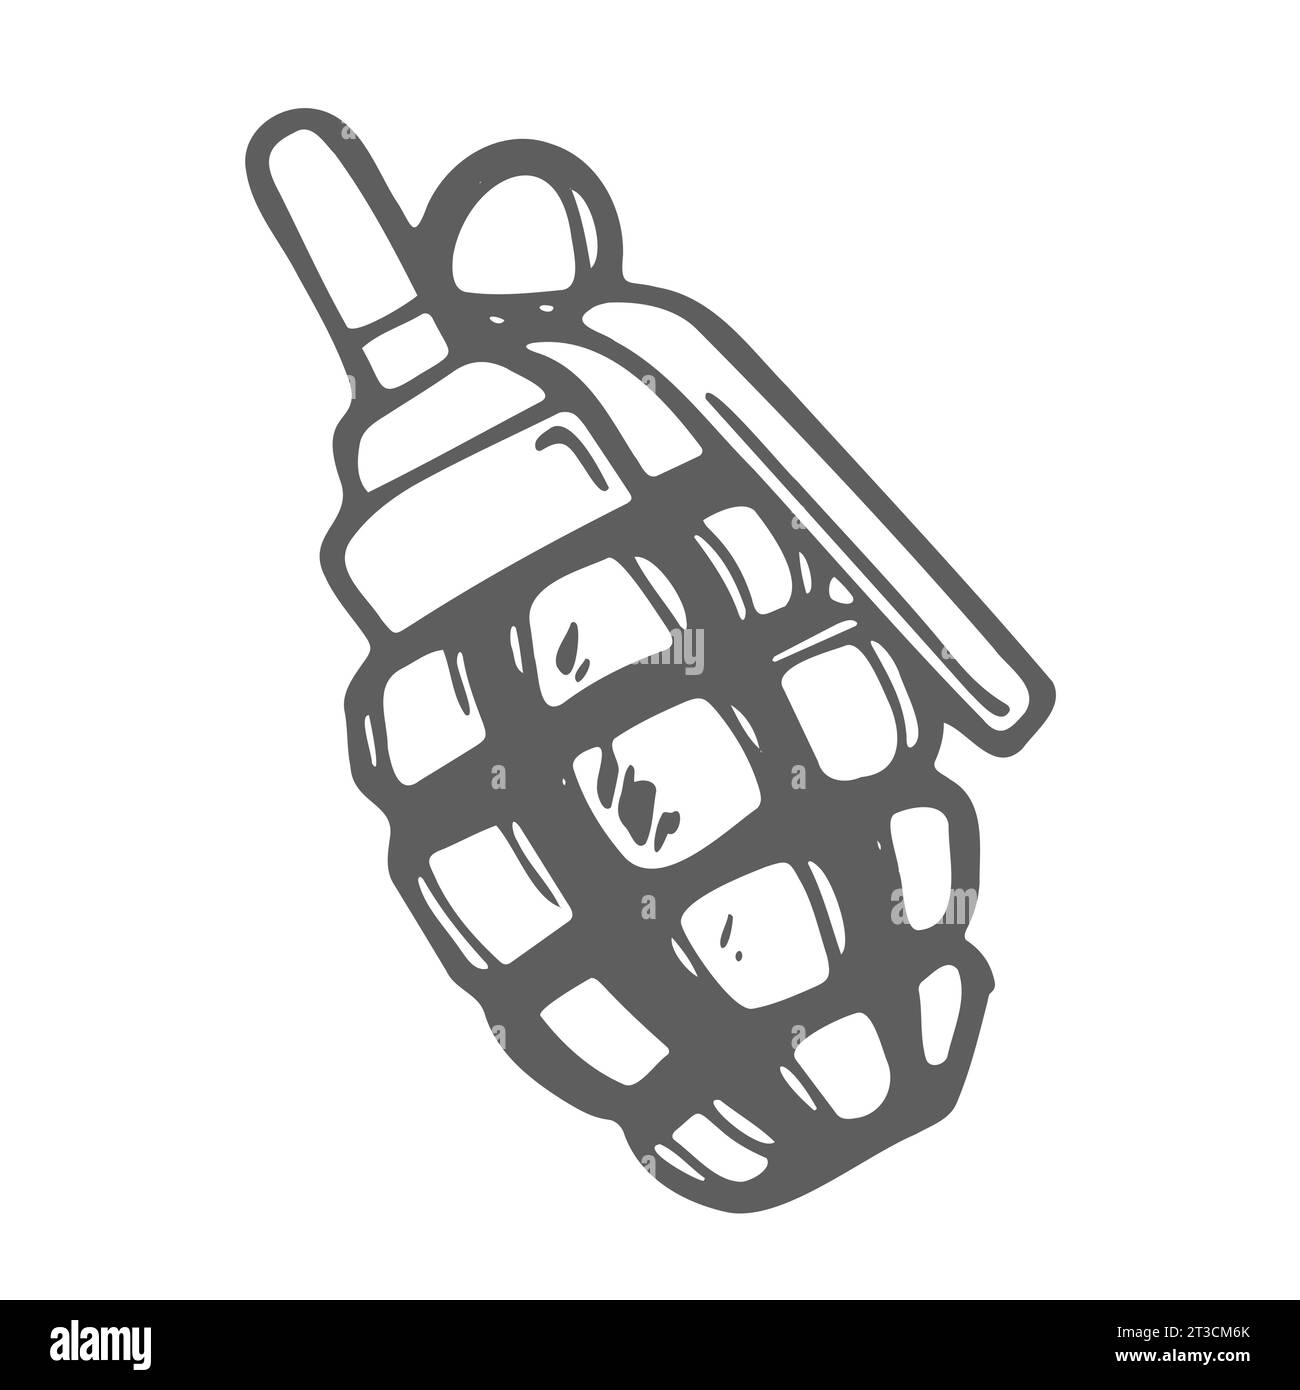 Doodle style pineapple hand grenade illustration in vector format suitable for web, print Stock Vector